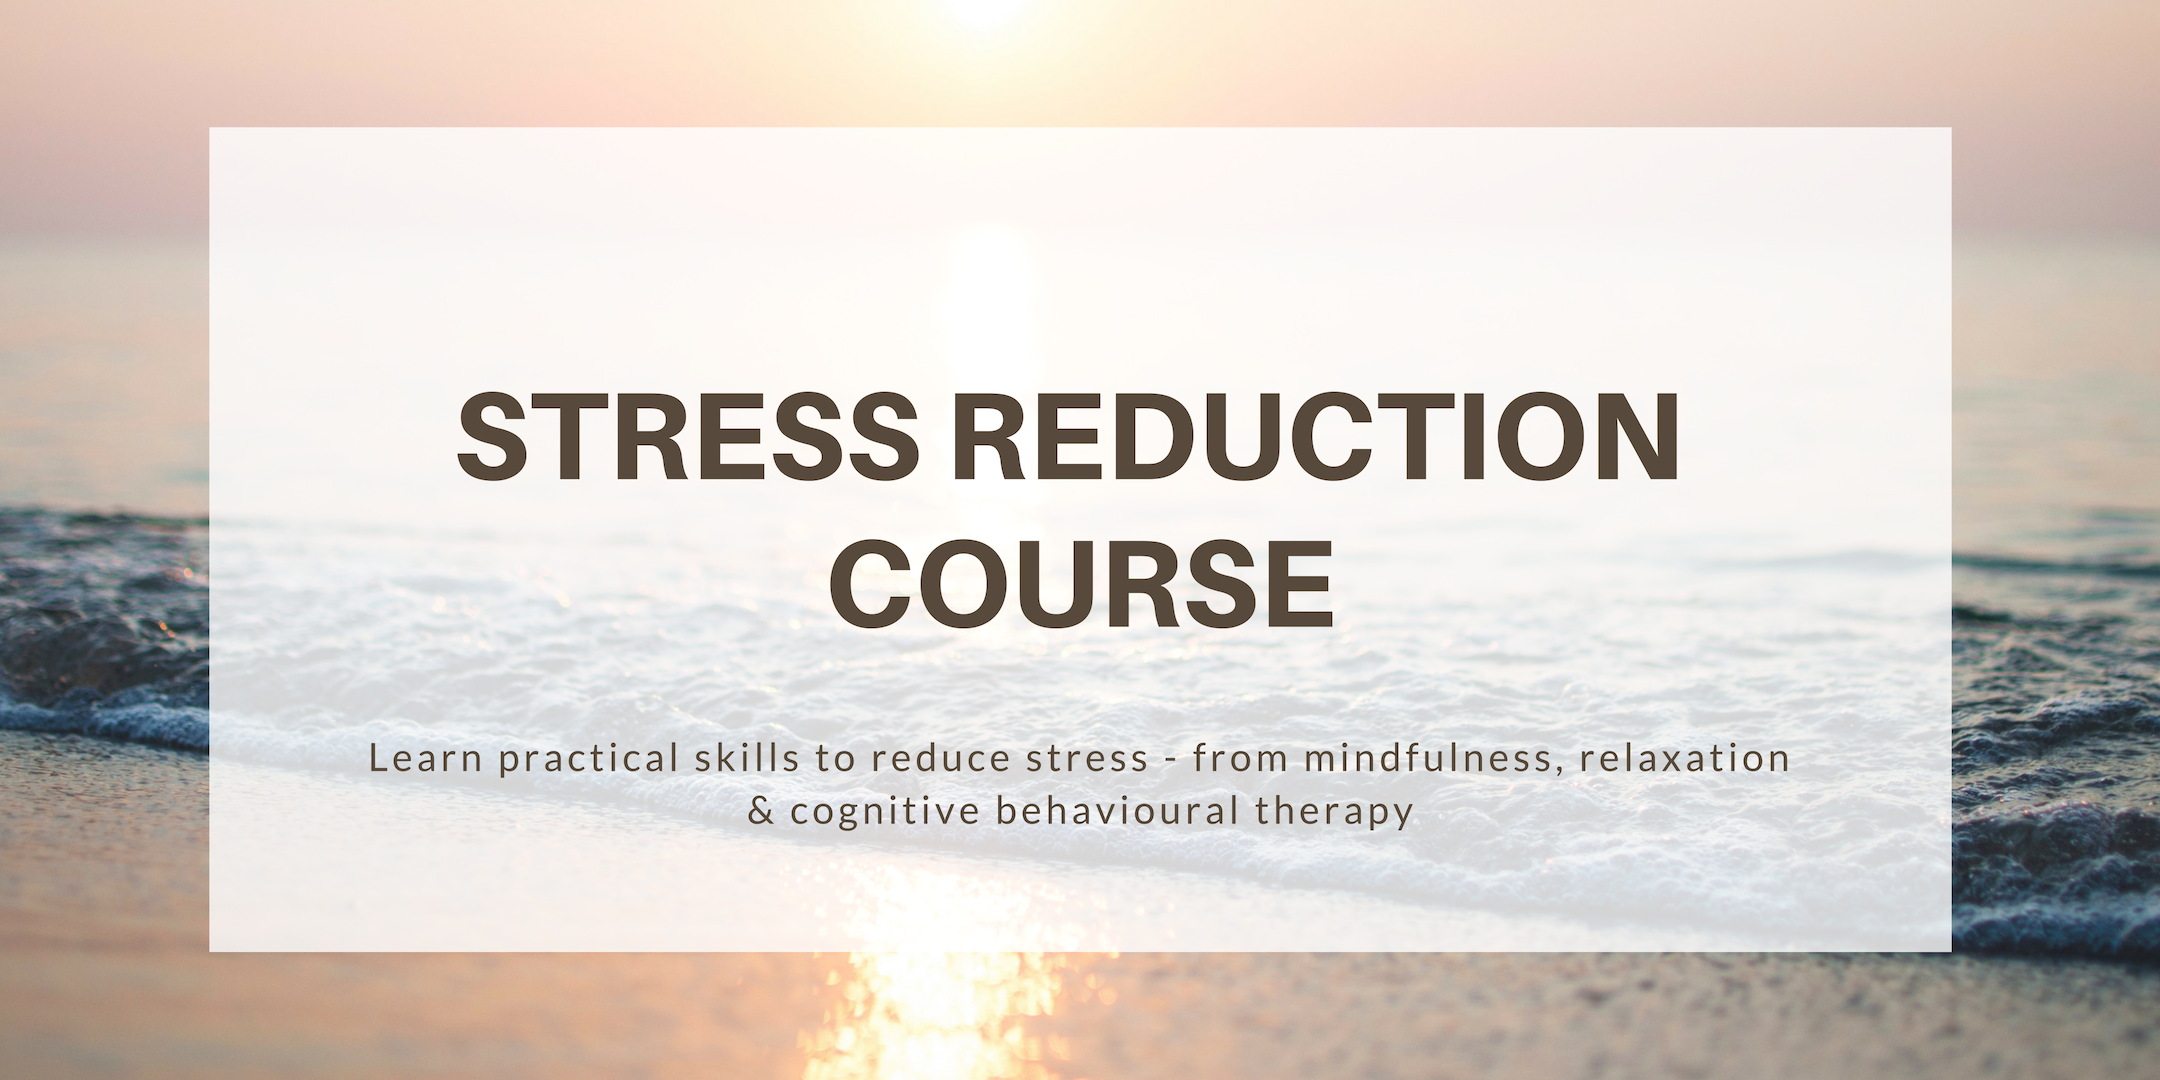 Stress reduction course